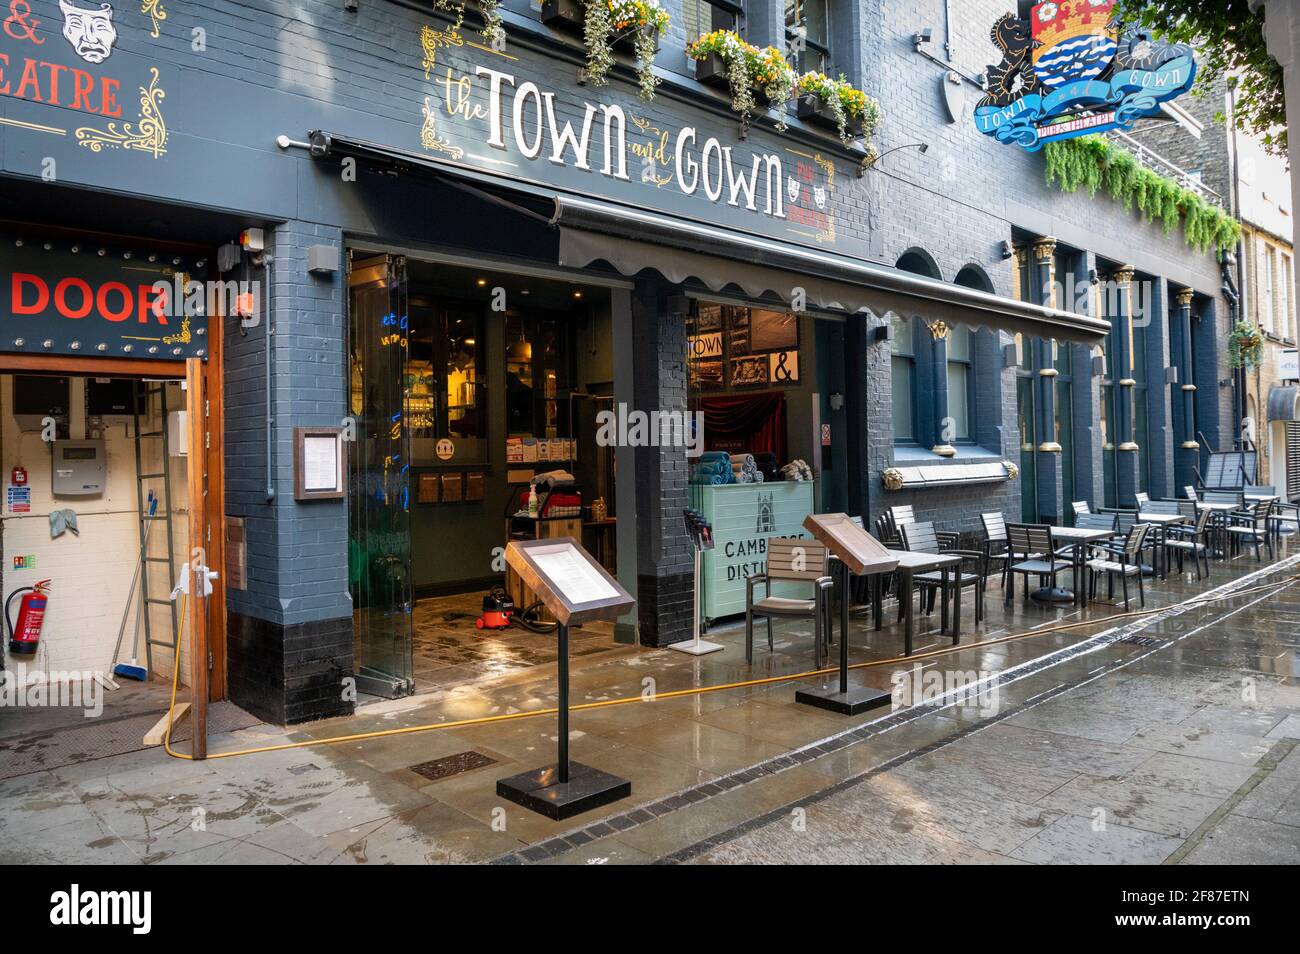 Cambridge, UK. 12th Apr, 2021. Staff clean the pavement and seating area outside the Town and Gown pub as hospitality venues reopen in Cambridge as part of the UK easing of Covid 19 lockdown restrictions. The roadmap allows outside service in pubs and bars from today. Credit: Julian Eales/Alamy Live News Stock Photo